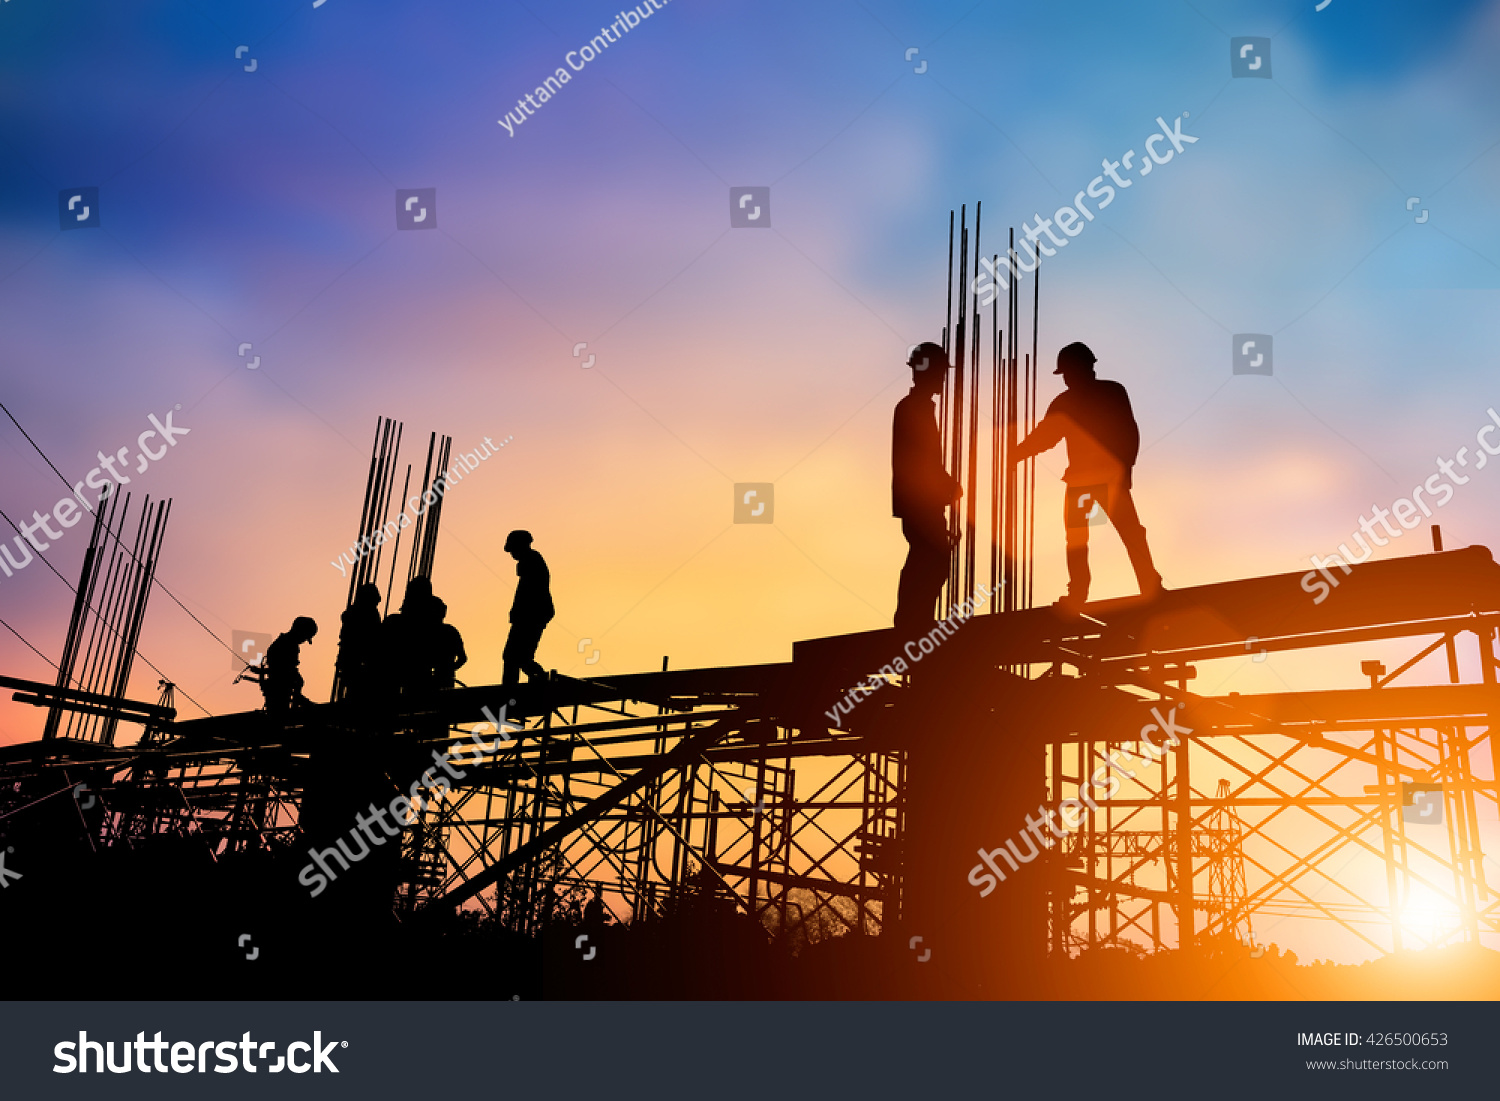 Silhouette engineer standing orders for construction crews to work on high ground  heavy industry and safety concept over blurred natural background sunset pastel #426500653